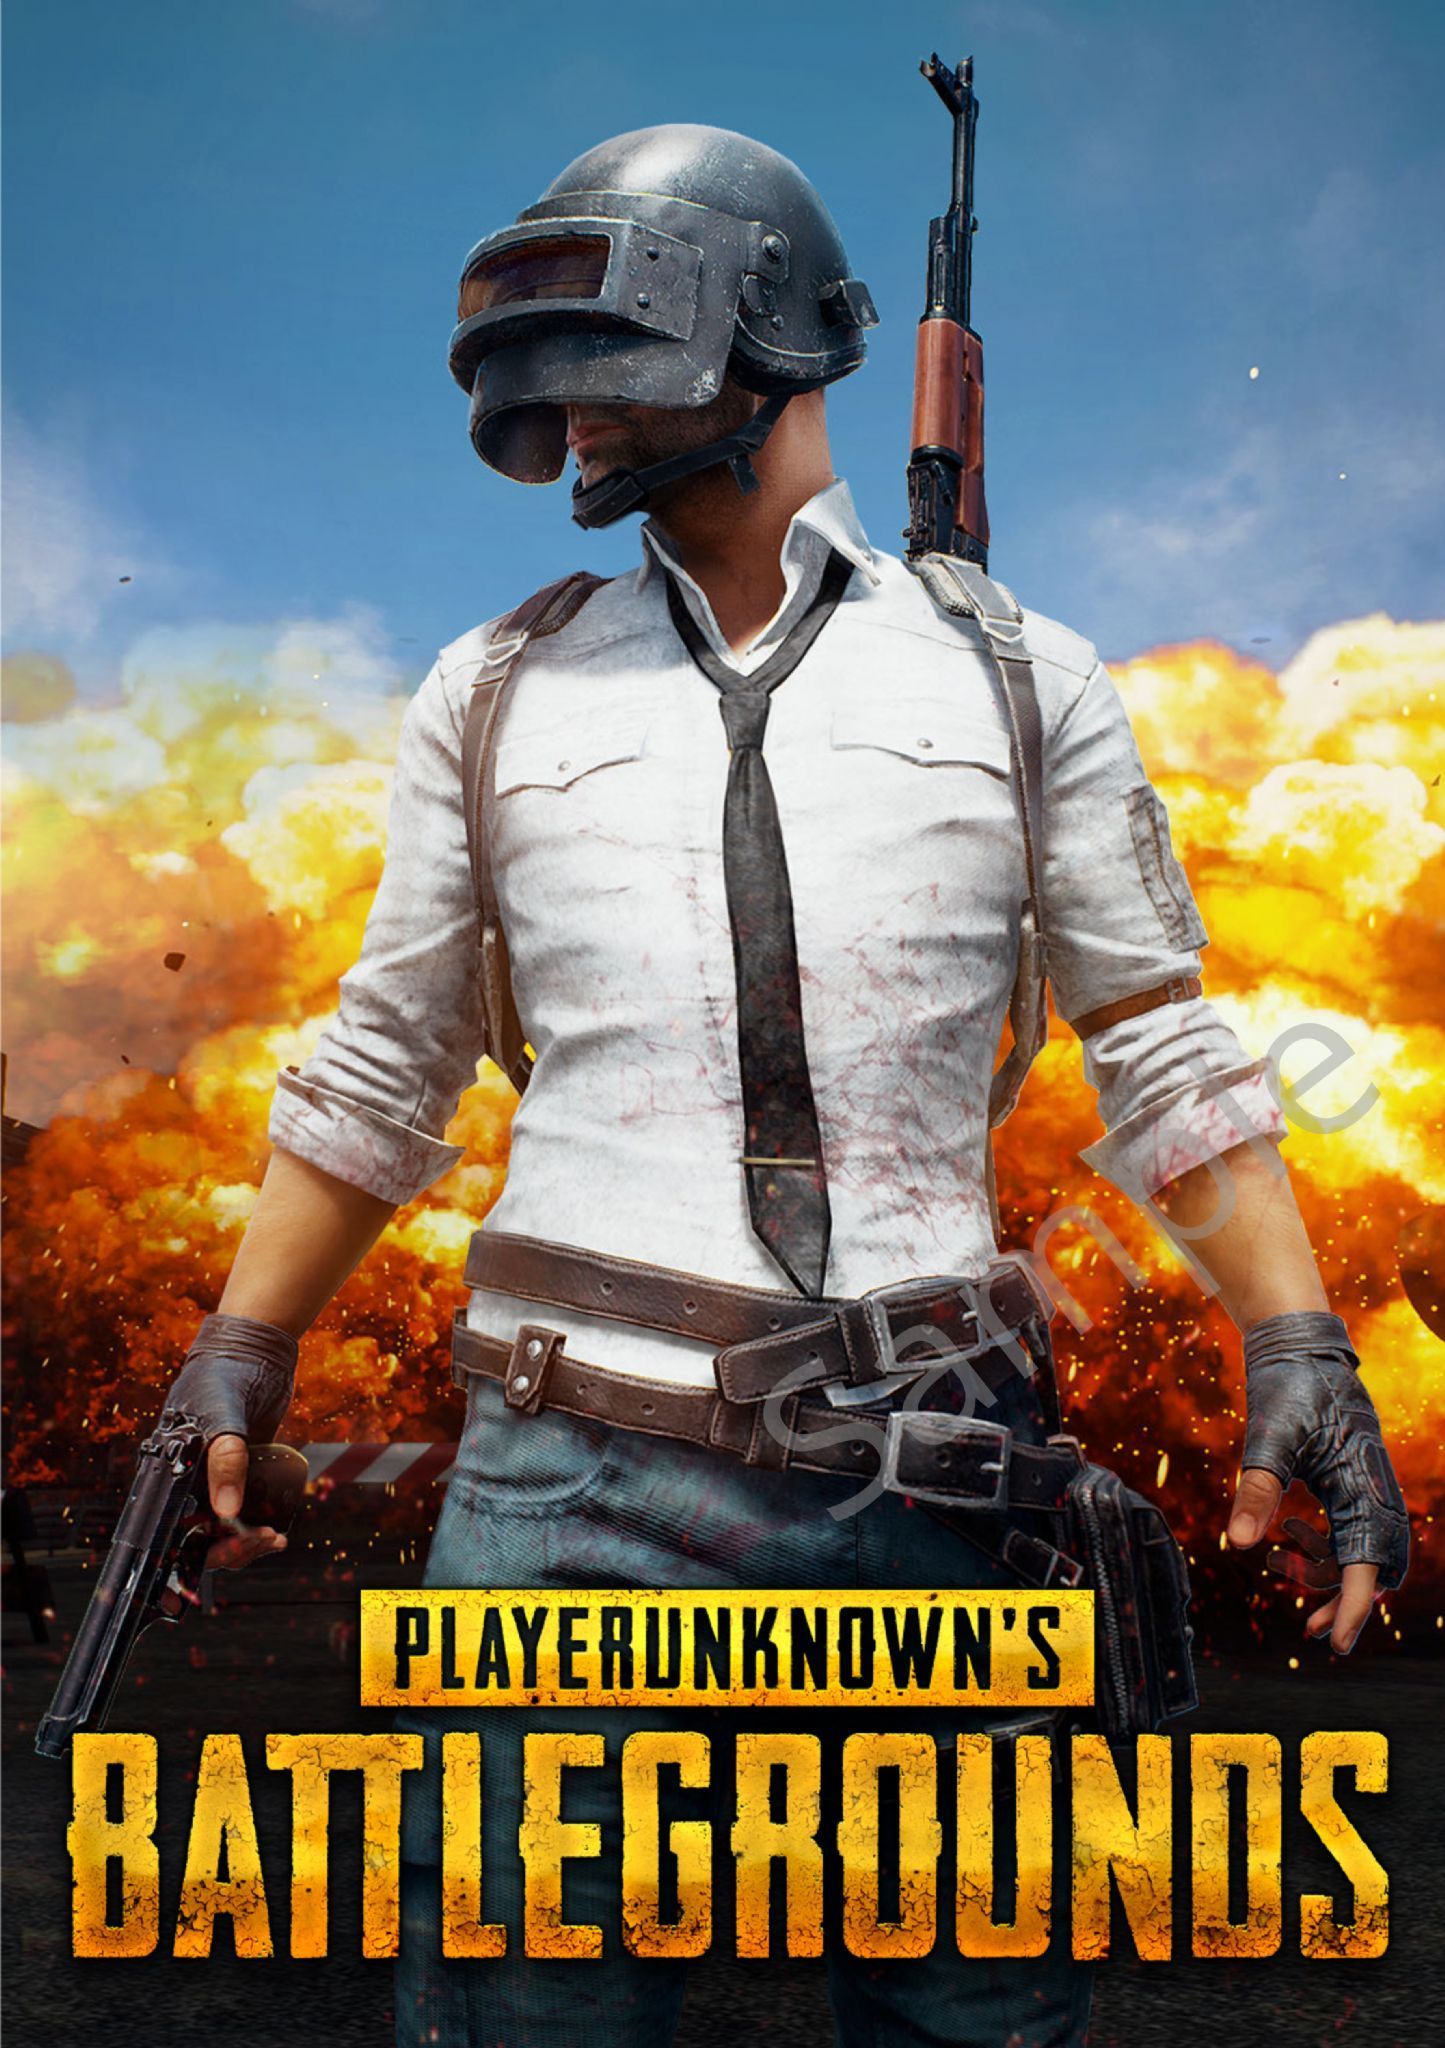 PLAYER UNKNOWN'S G Battlegrounds POSTER. Gaming